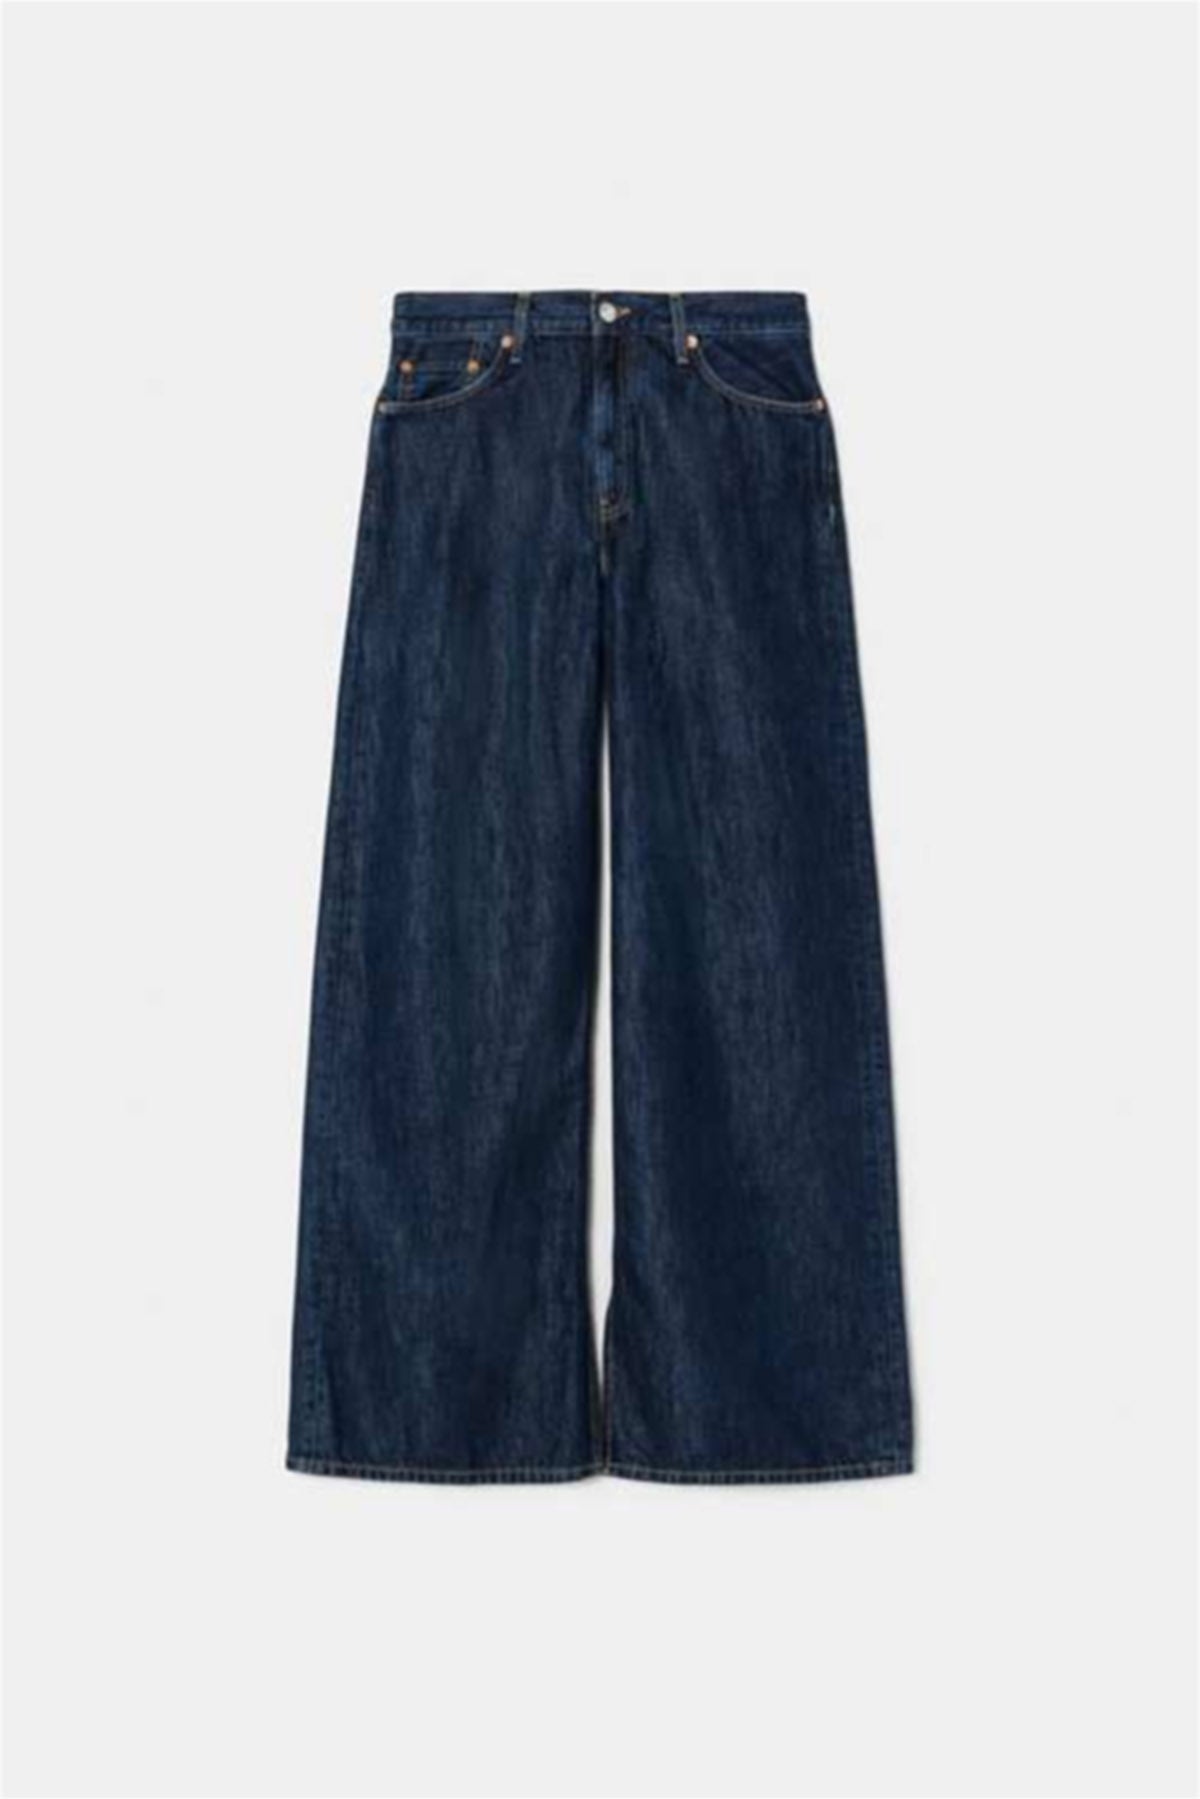 RE/DONE PANTALONE IN DENIM  Jeans Donna Re/Done Low Rider Loose